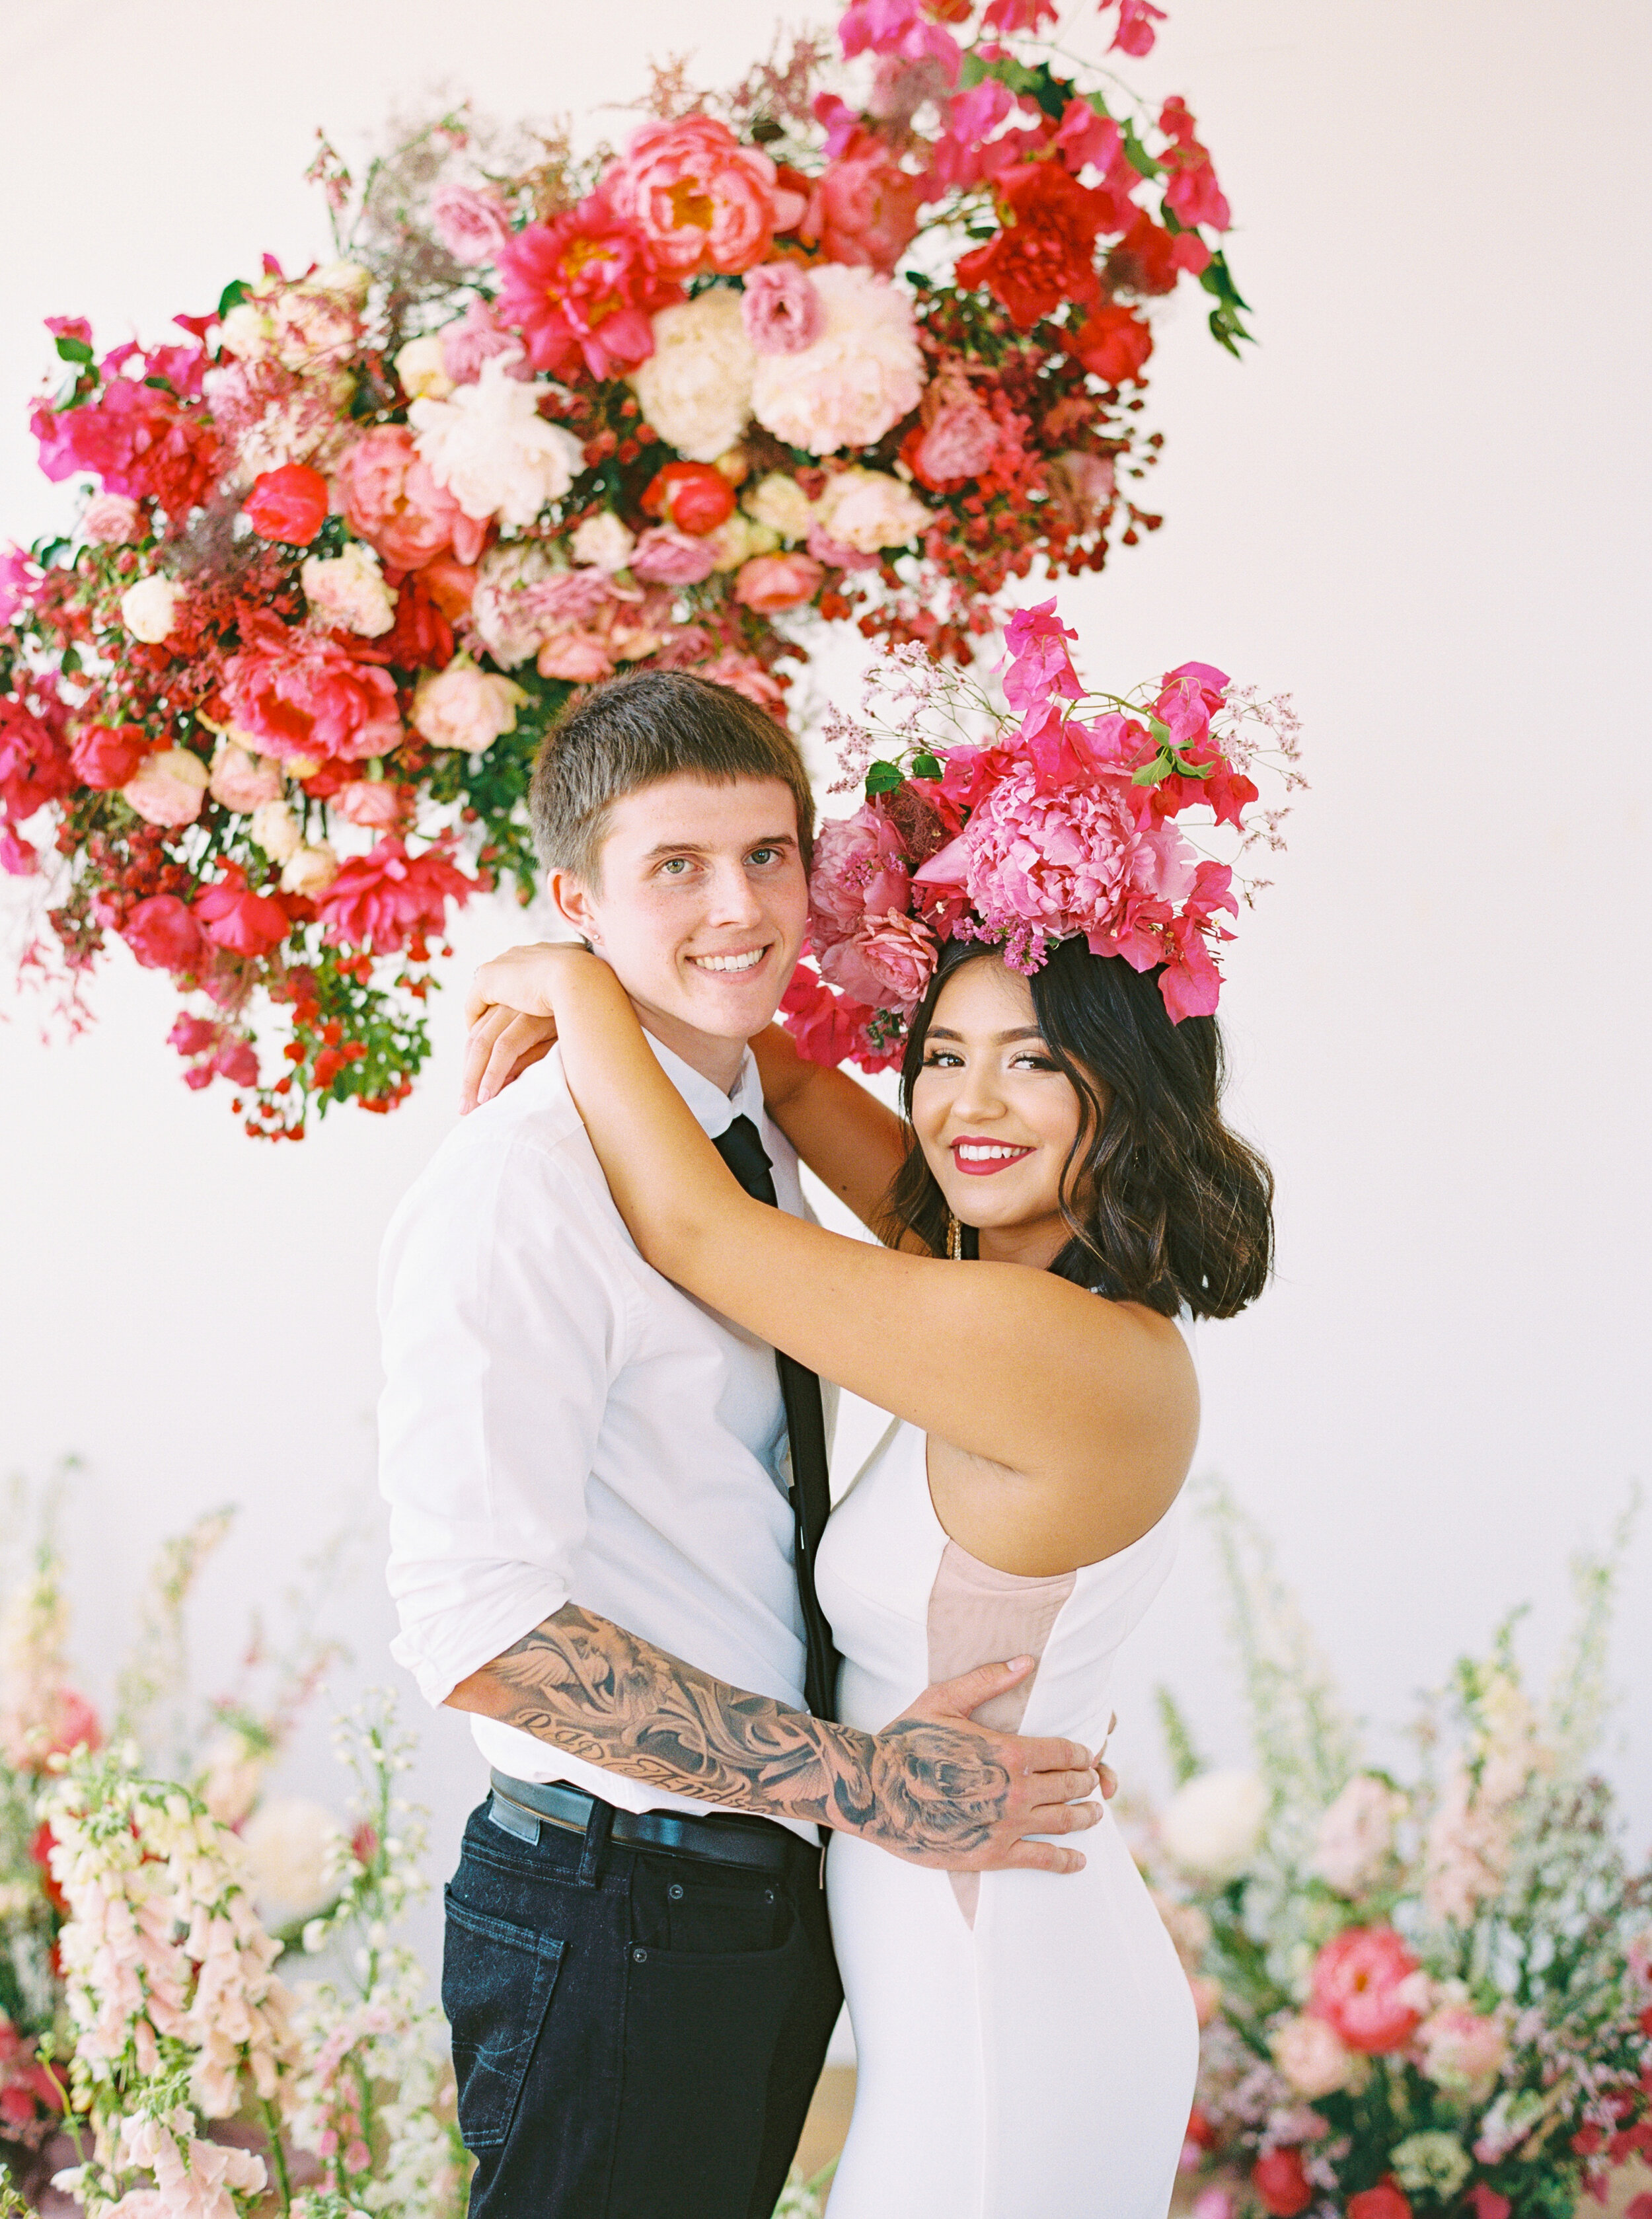 A Romantic Wedding Elopement Filled with Colorful Fuchsia - Sarahi Hadden Submission-67.jpg